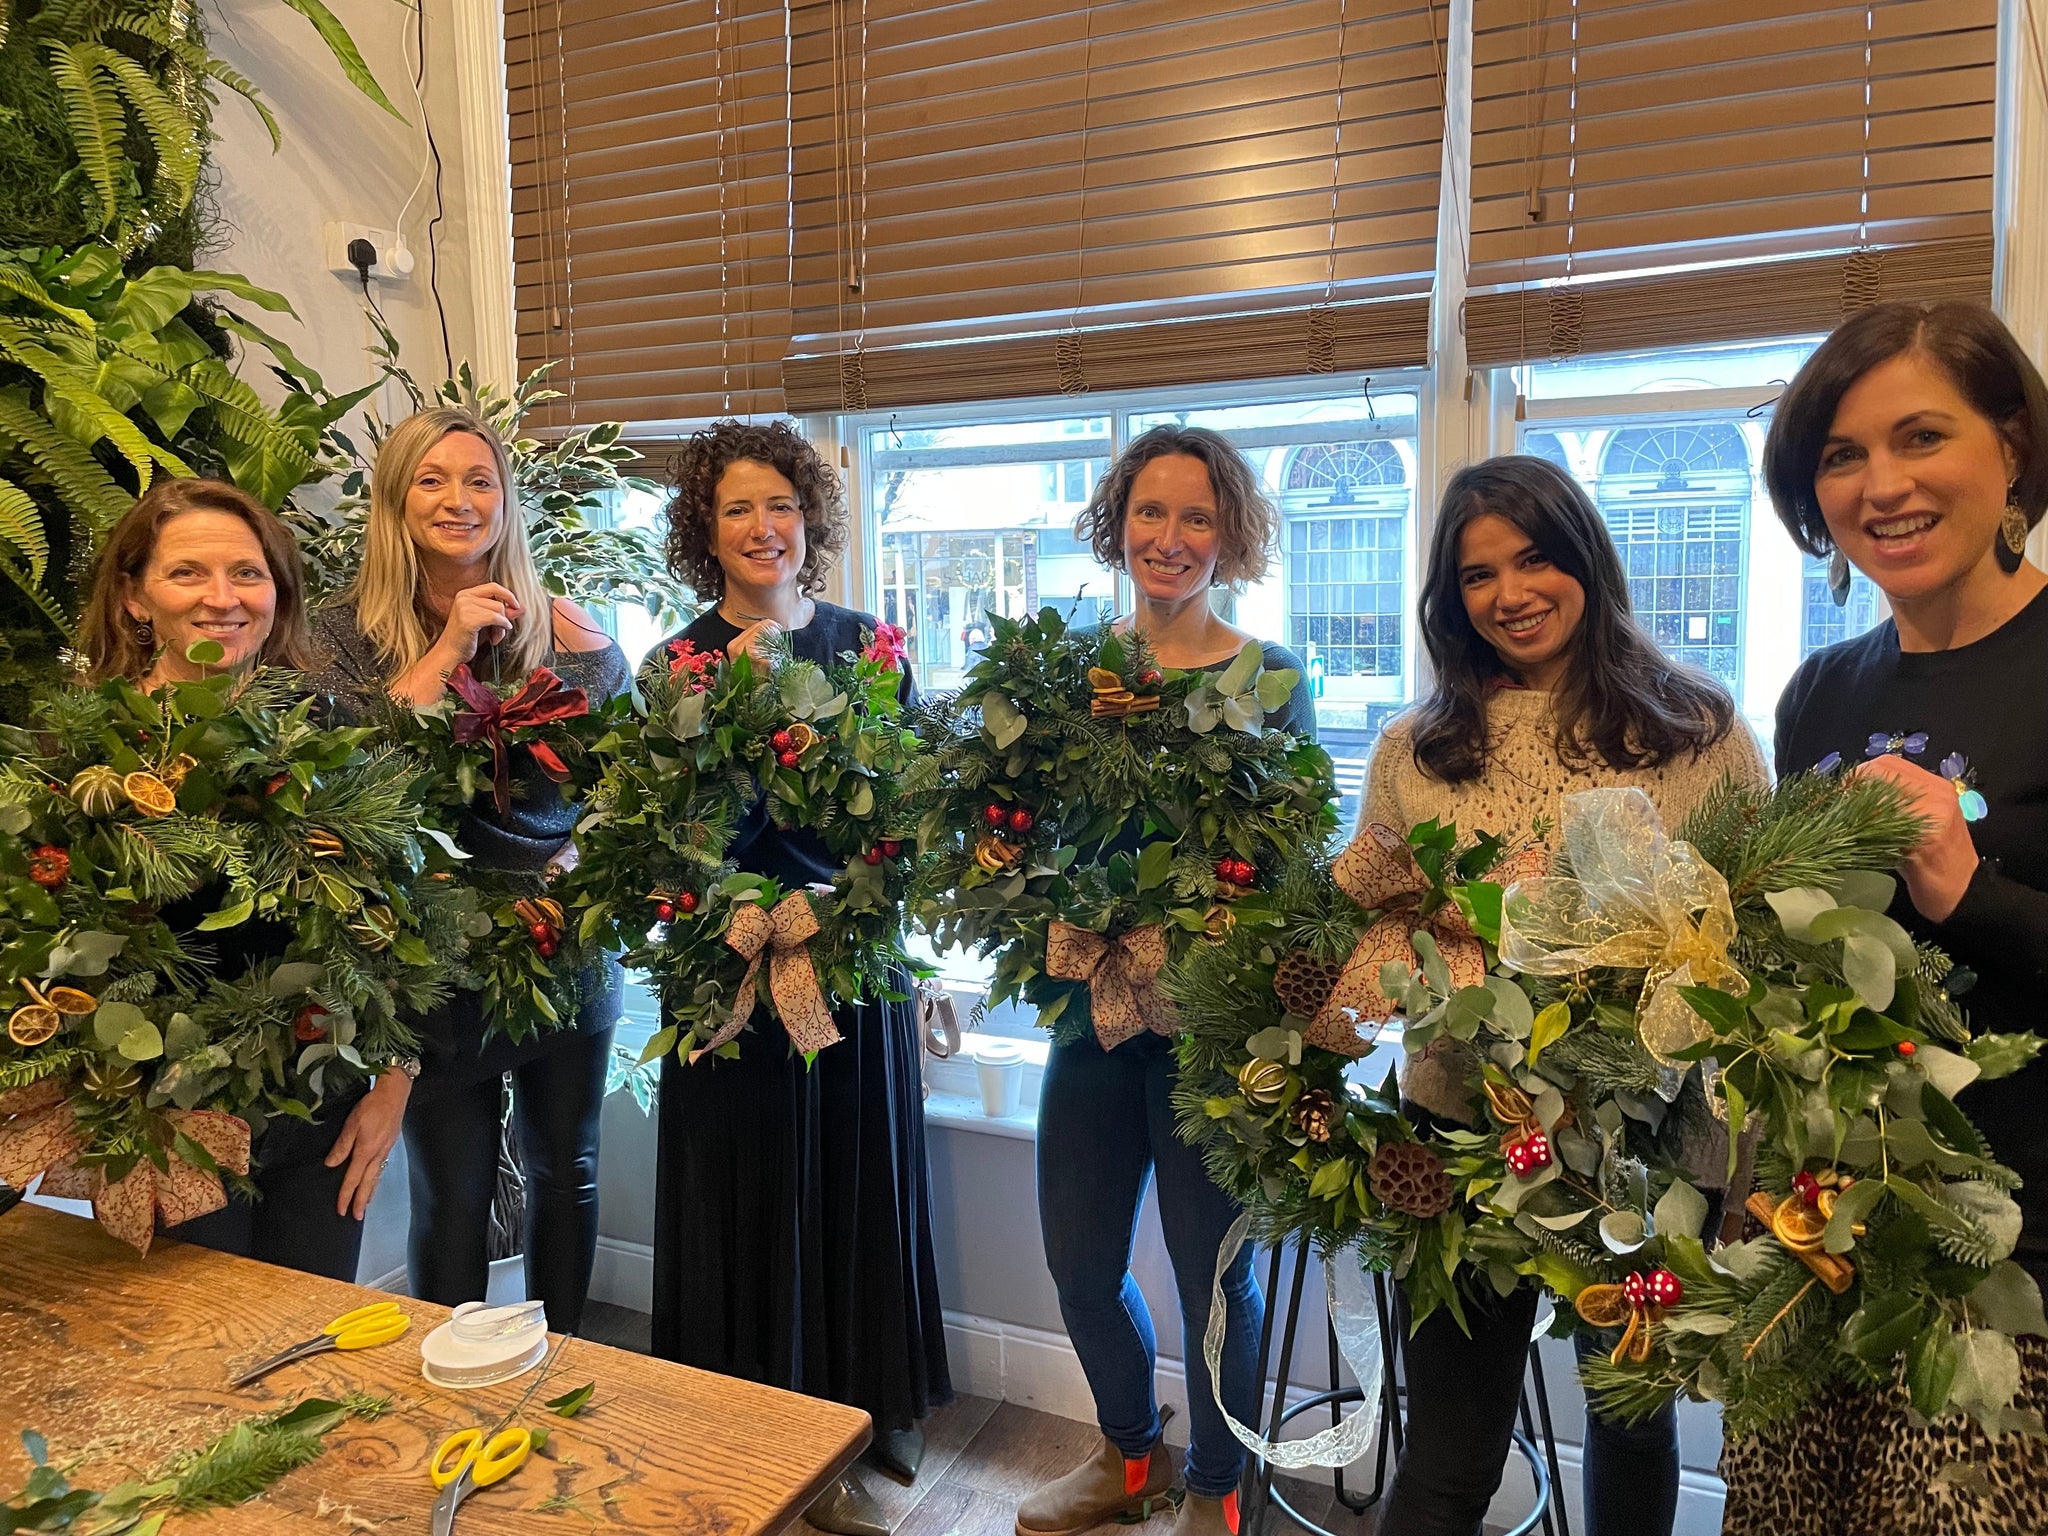 Christmas Wreath Workshop – Thursday 30th November, Starting @ 11am (£75 per person) 2.5 hours